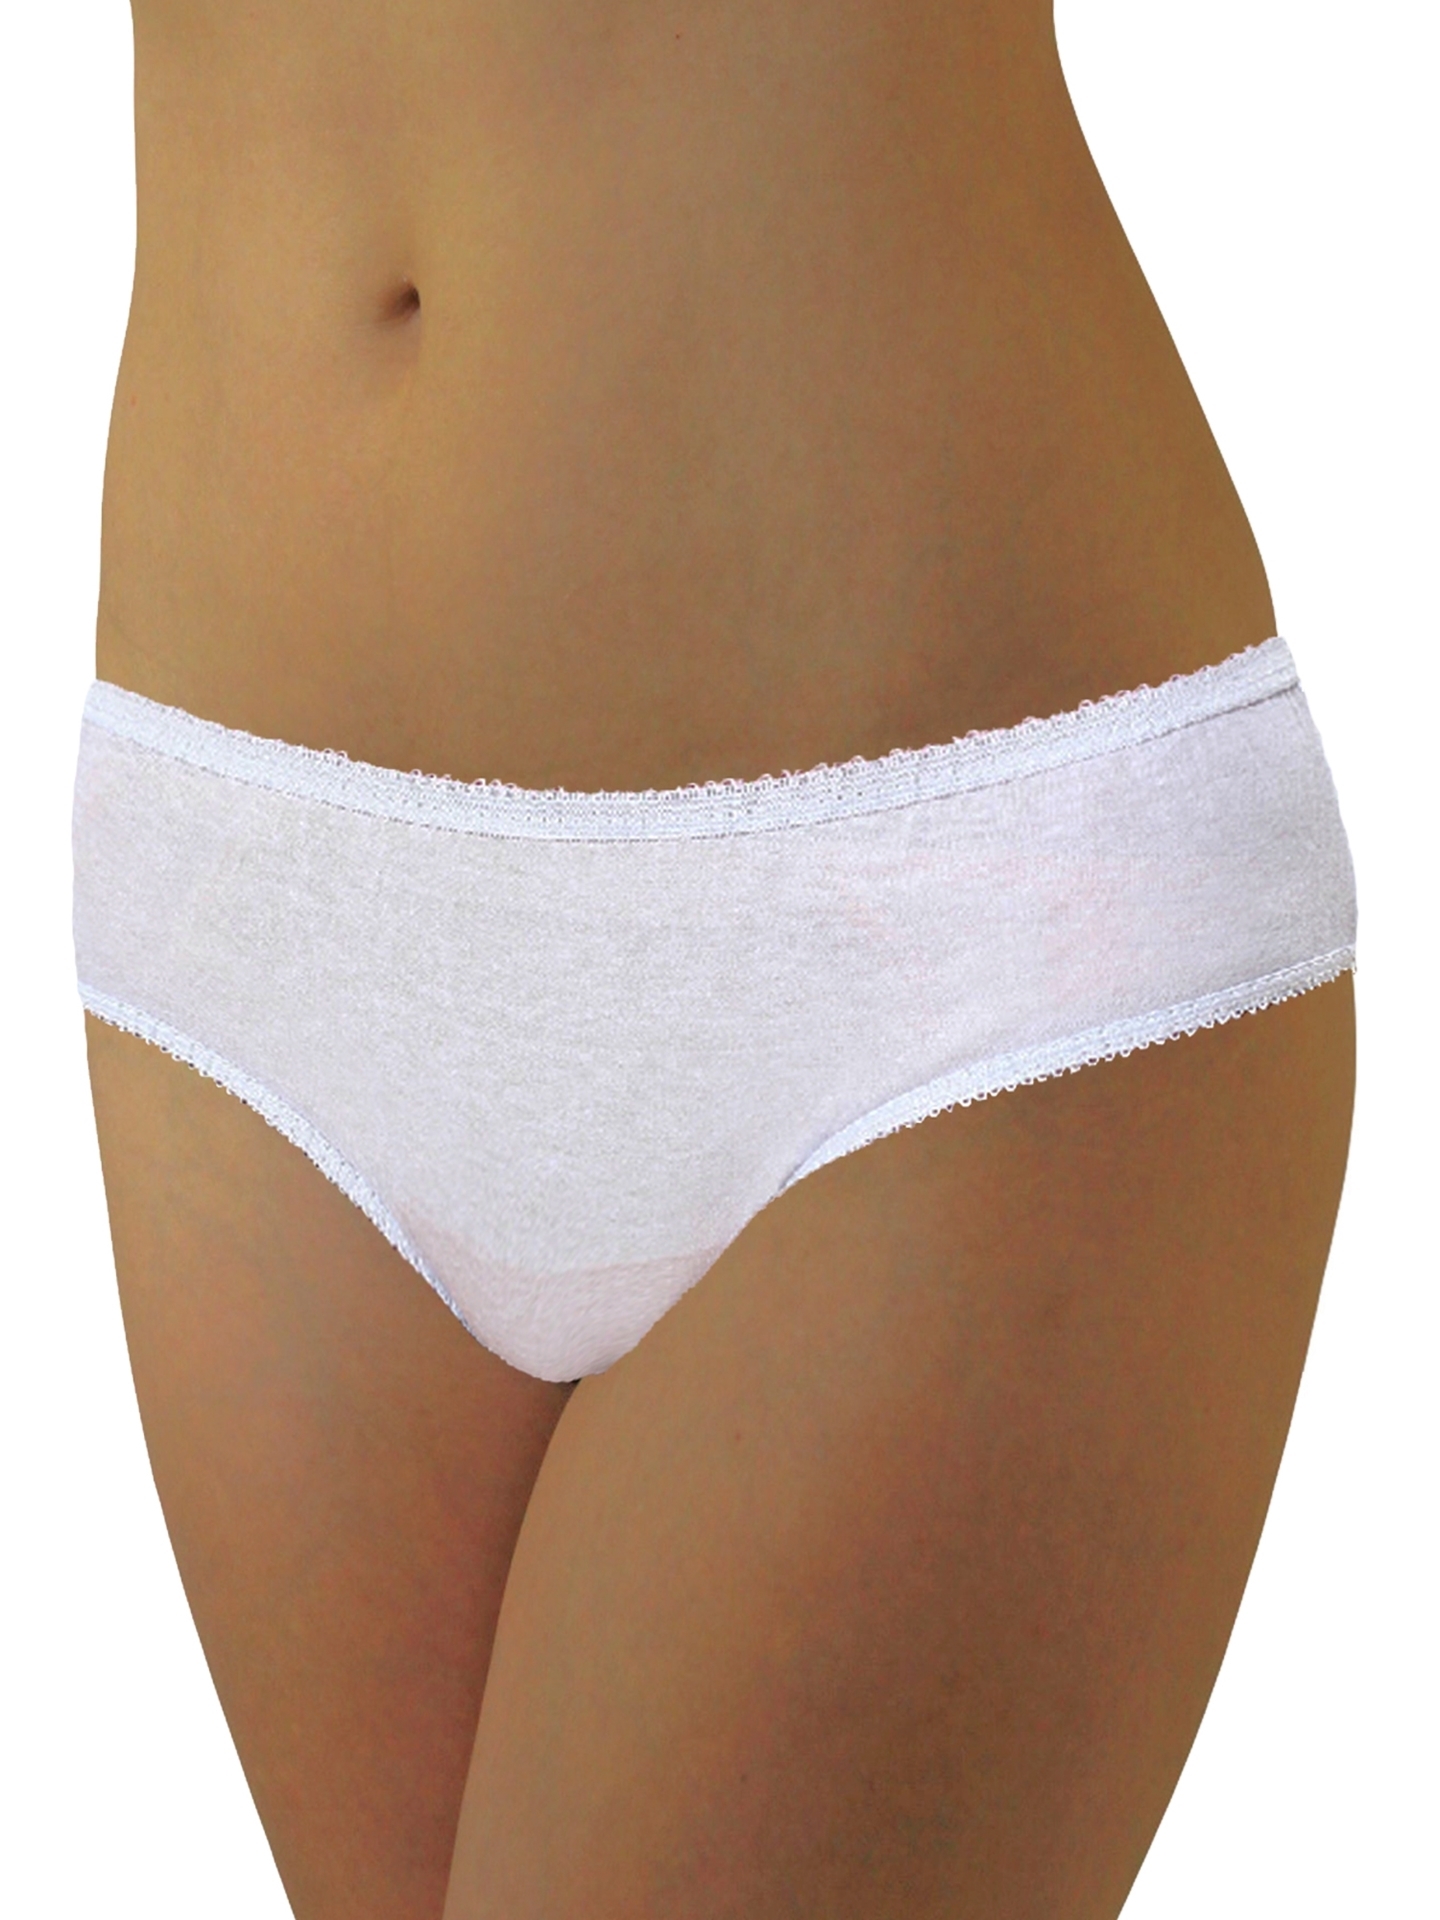 https://www.underworks.com/images/thumbs/0001615_womens-disposable-100-cotton-underwear-for-travel-hospital-stays-emergencies-10-pack.jpeg